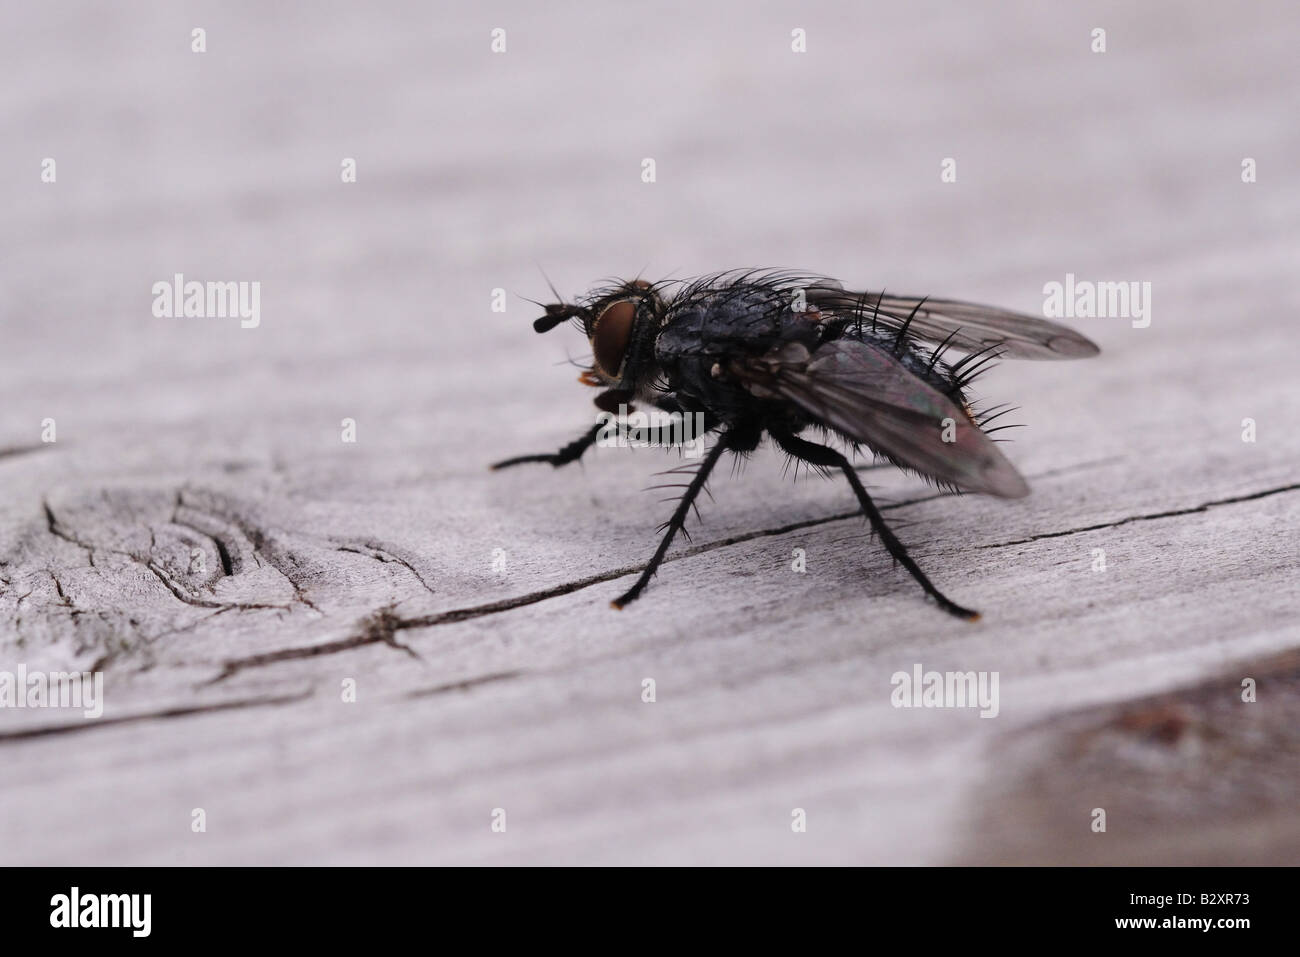 House Fly Maggots - Stock Image - C002/2191 - Science Photo Library